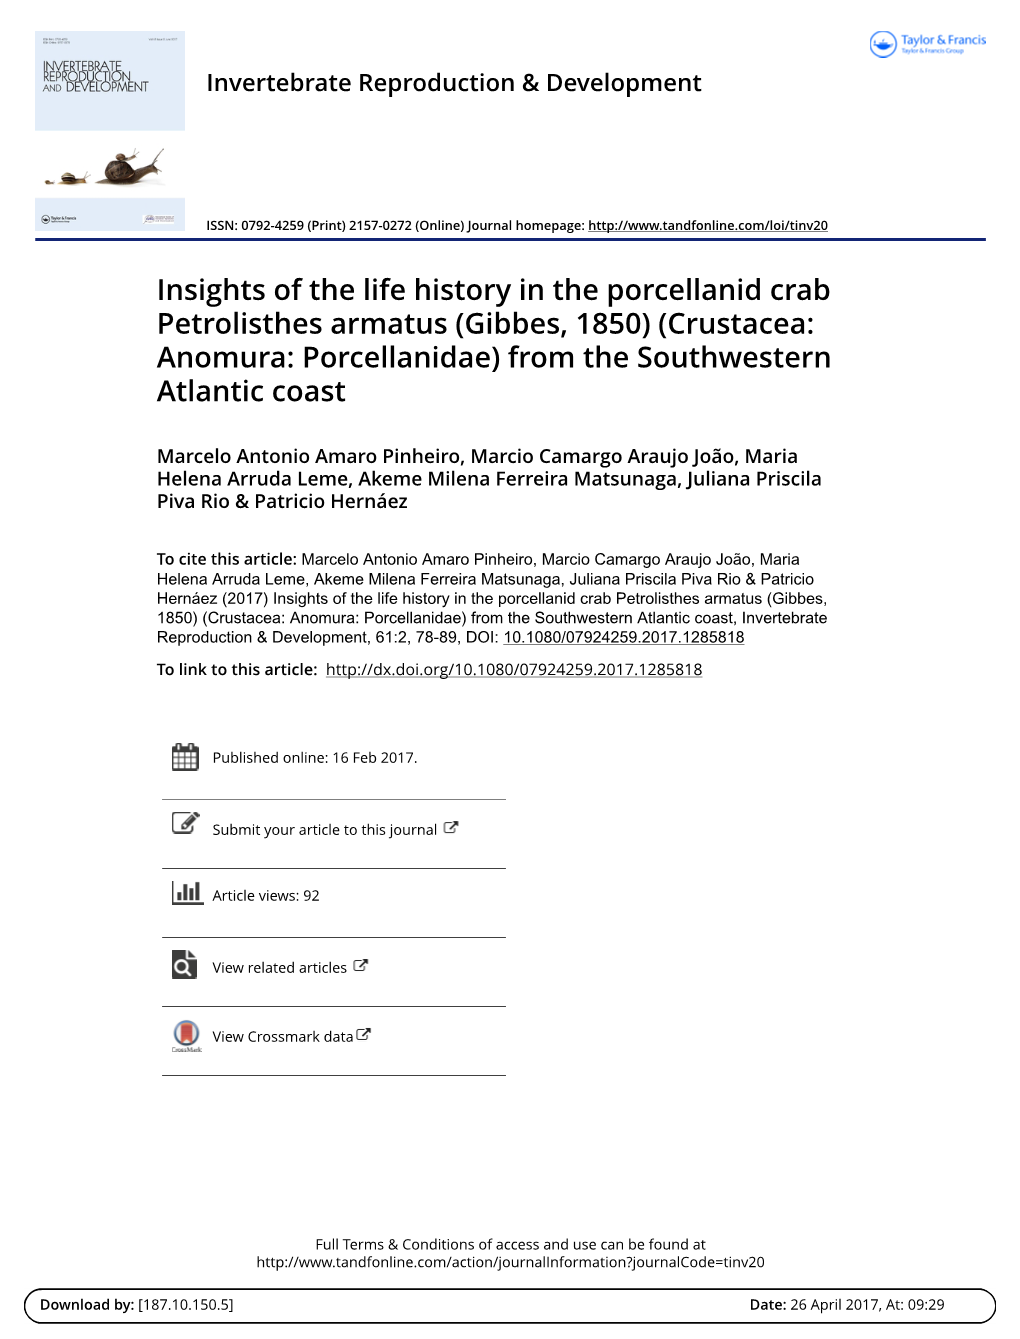 Insights of the Life History in the Porcellanid Crab Petrolisthes Armatus (Gibbes, 1850) (Crustacea: Anomura: Porcellanidae) from the Southwestern Atlantic Coast